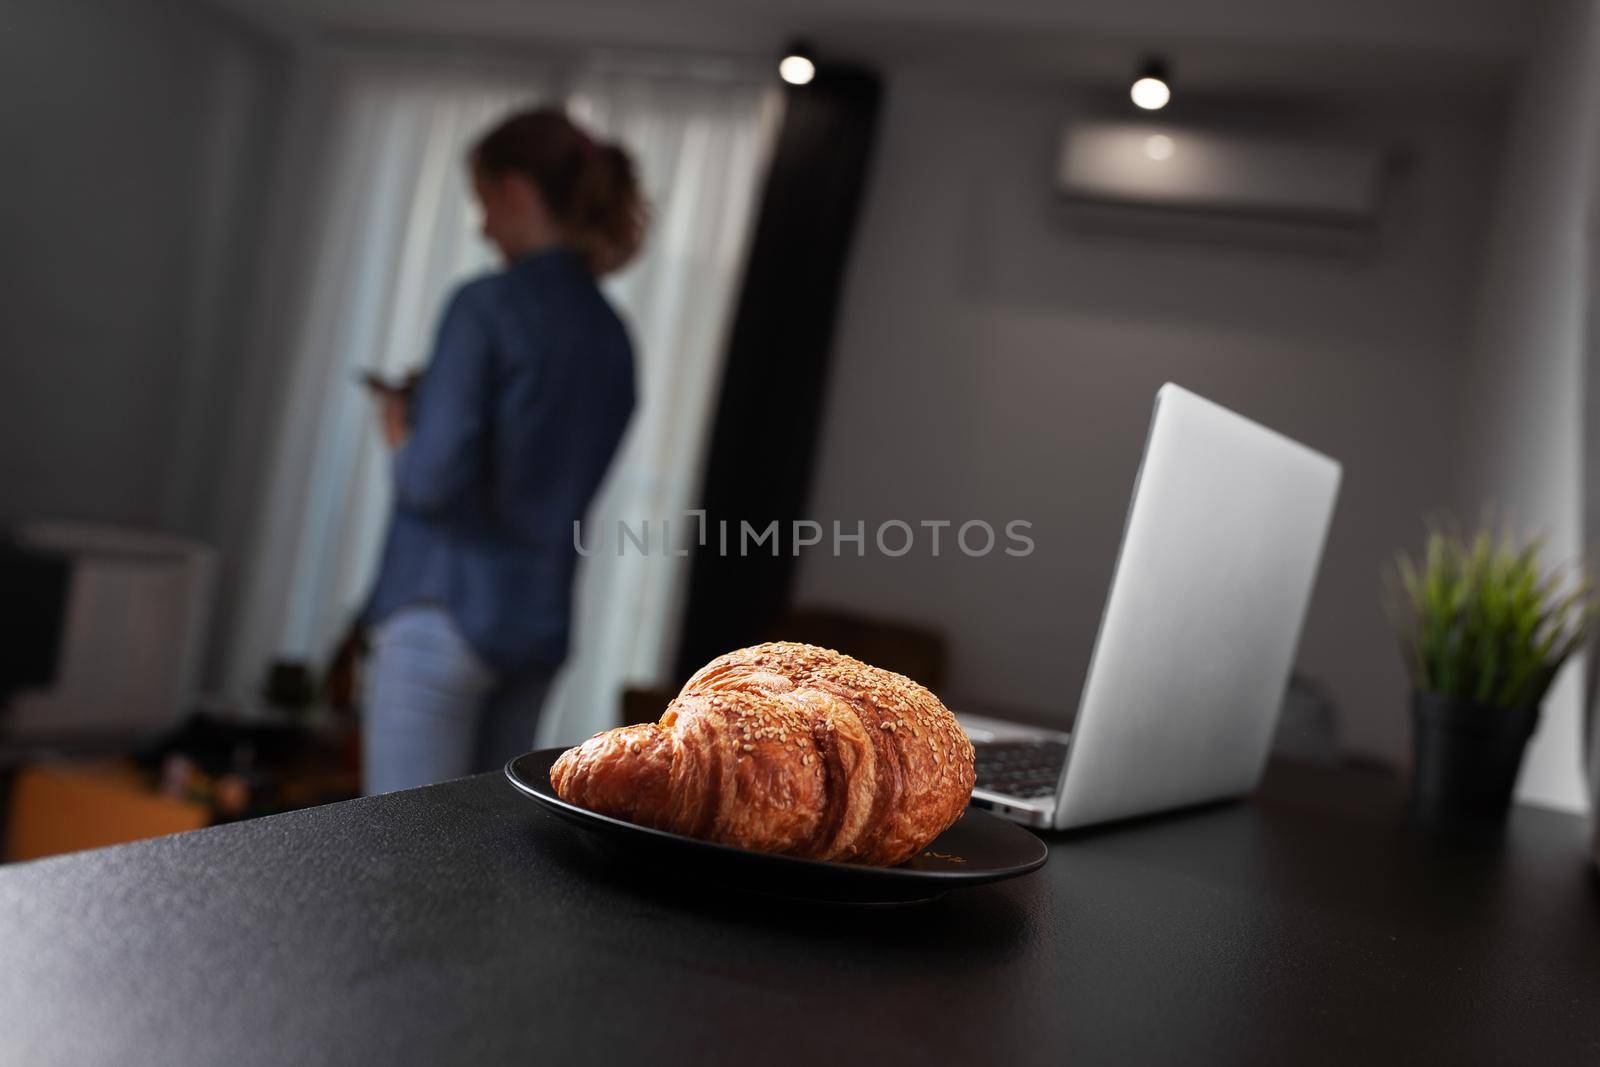 Croissant and laptop on a table in the living room. Out of focus girl in the background